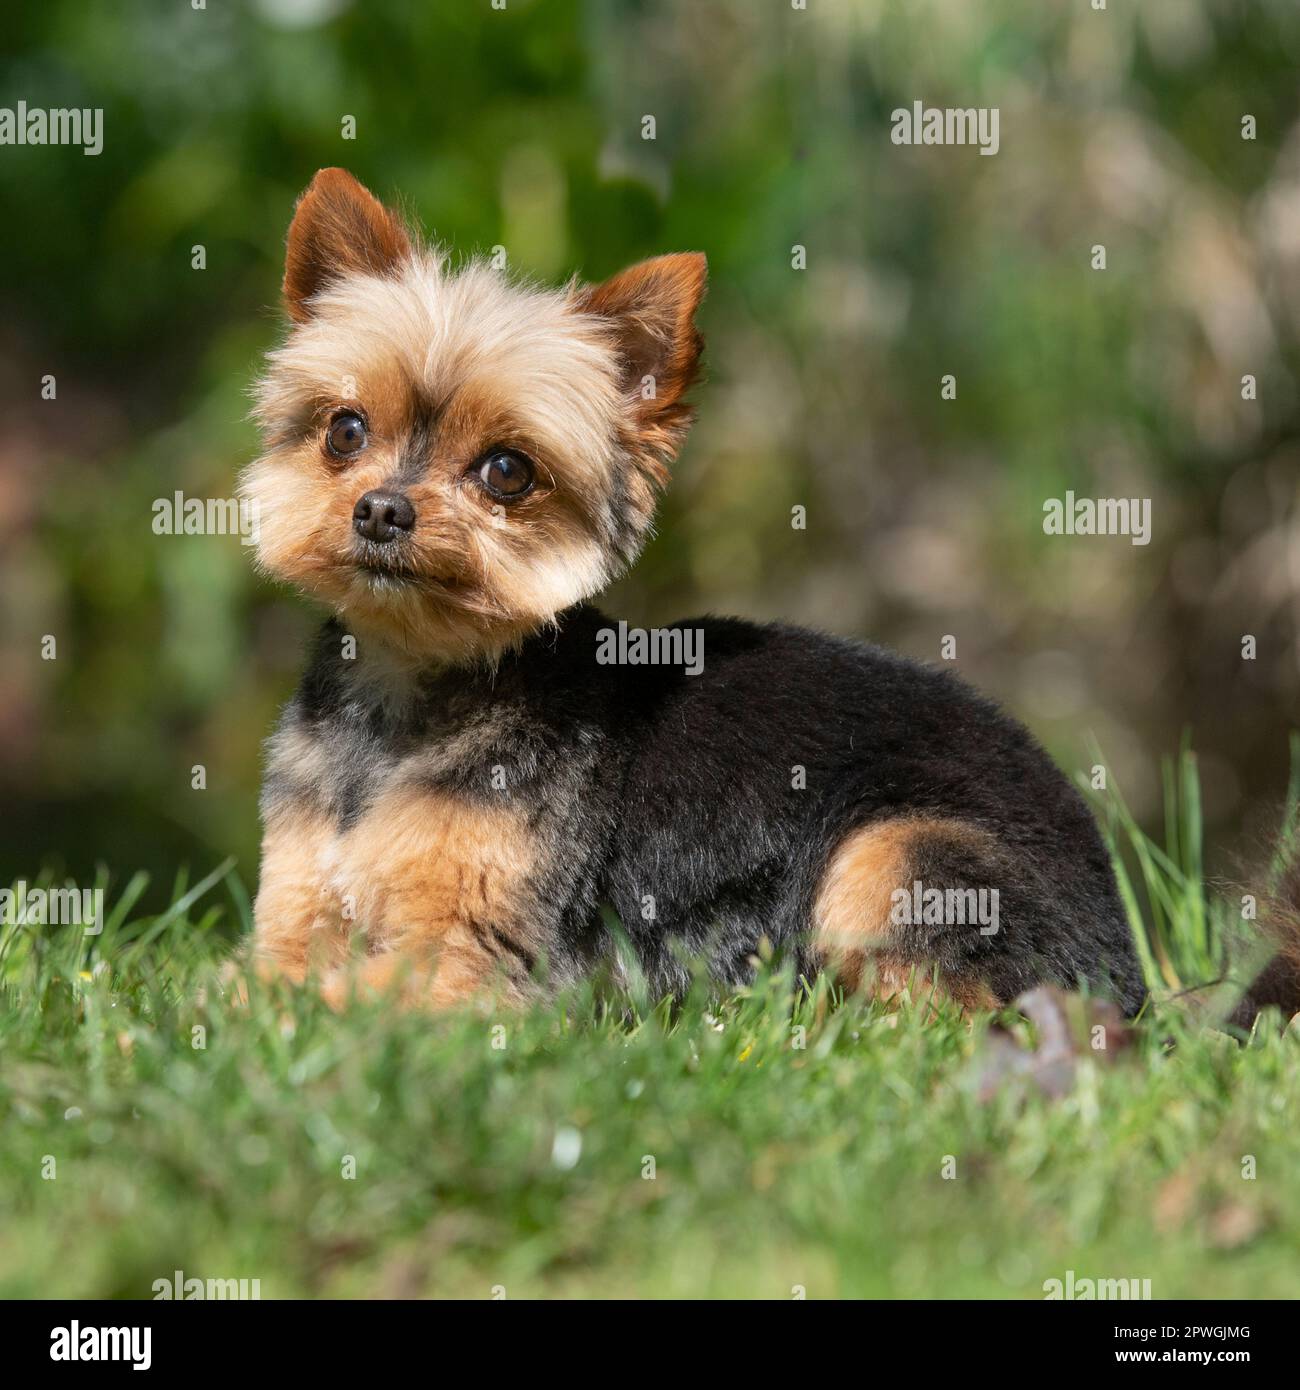 Yorkshire terrier lying down in grass Stock Photo